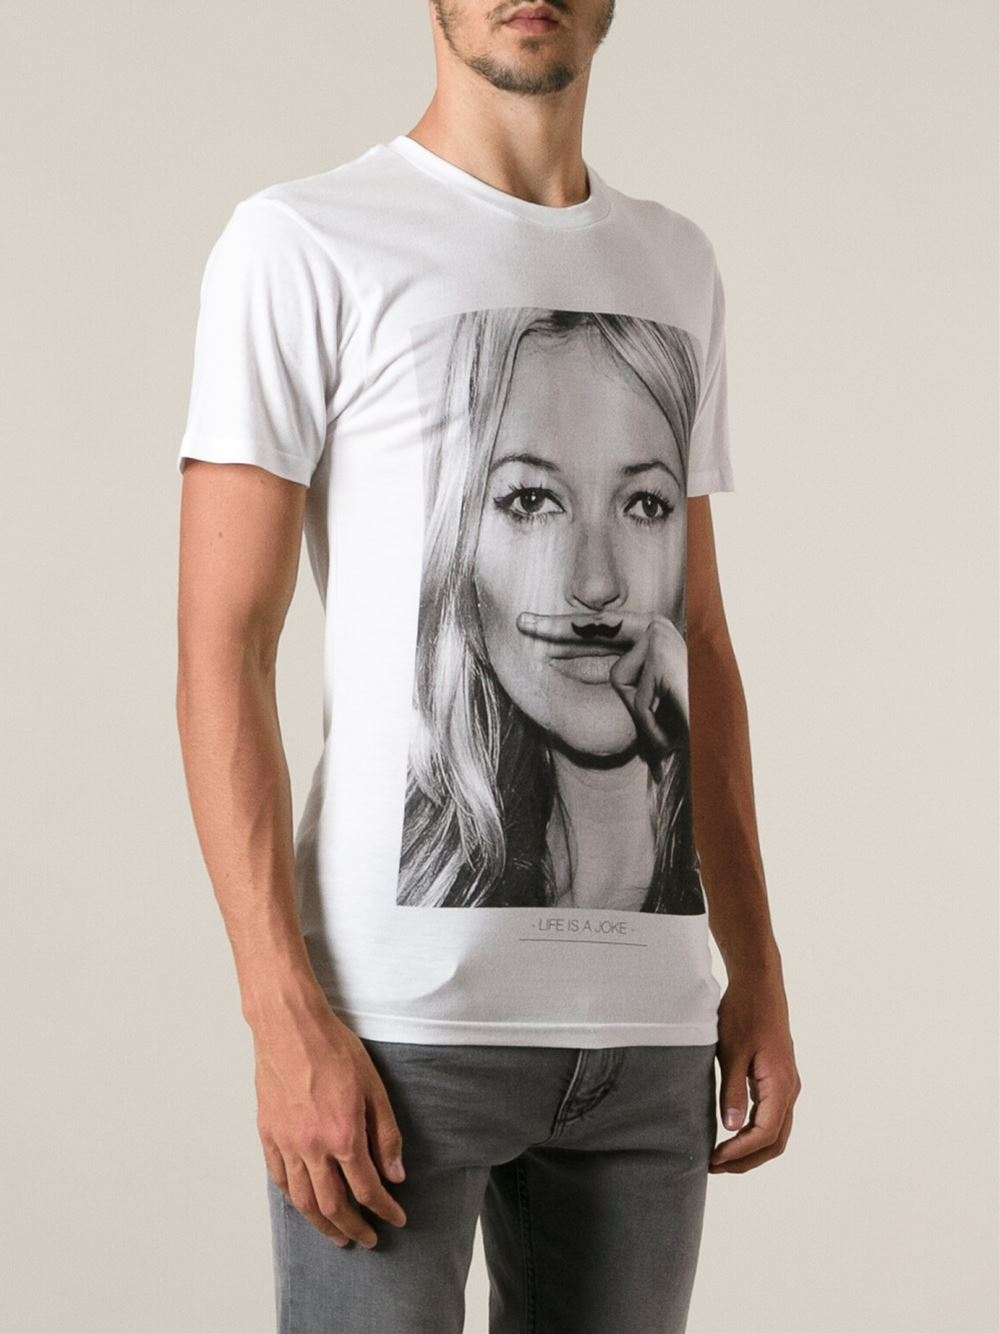 ELEVEN PARIS 'kate Moss' Print T-shirt in White for Men - Lyst